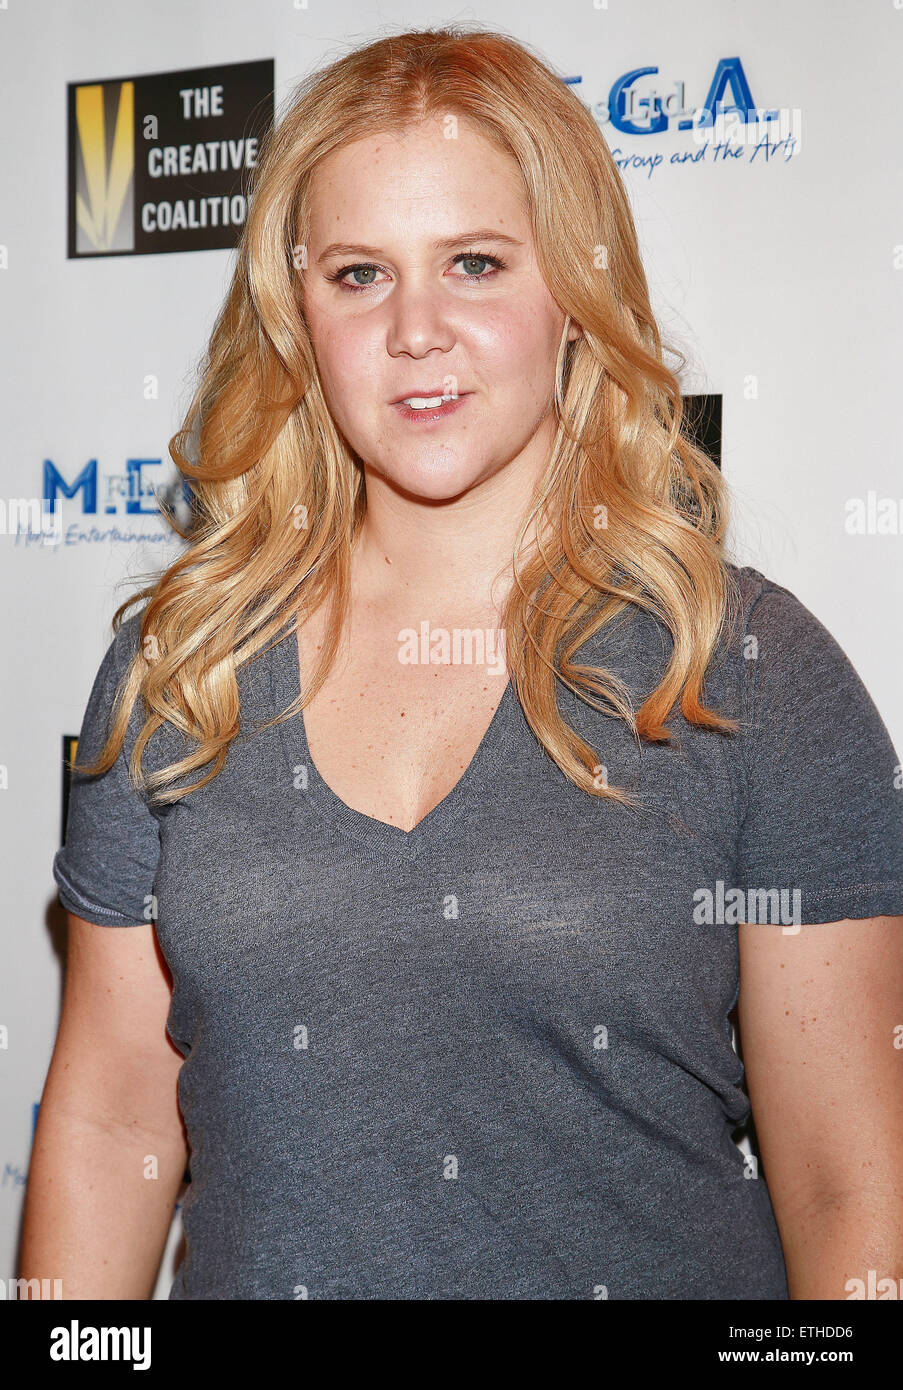 New York premiere party of 'Cop Show' at Caroline's On Broadway Comedy Club - Arrivals  Featuring: Amy Schumer Where: New York, New York, United States When: 23 Feb 2015 Credit: Joseph Marzullo/WENN.com Stock Photo